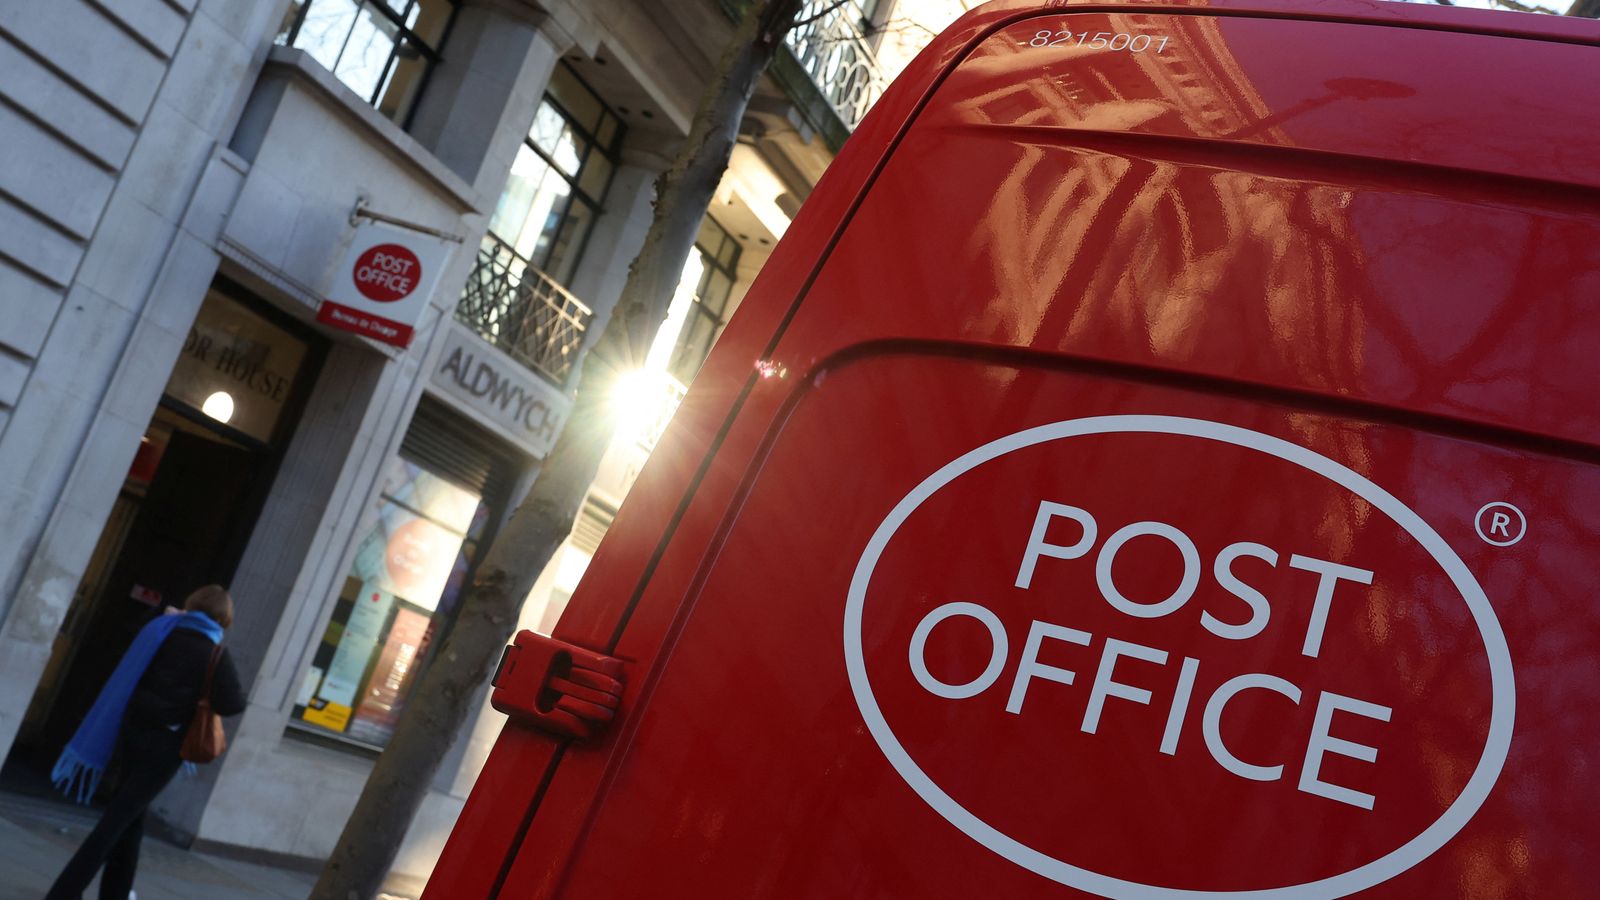 more than £1m claimed as post office 'profit' may have come from sub-postmasters